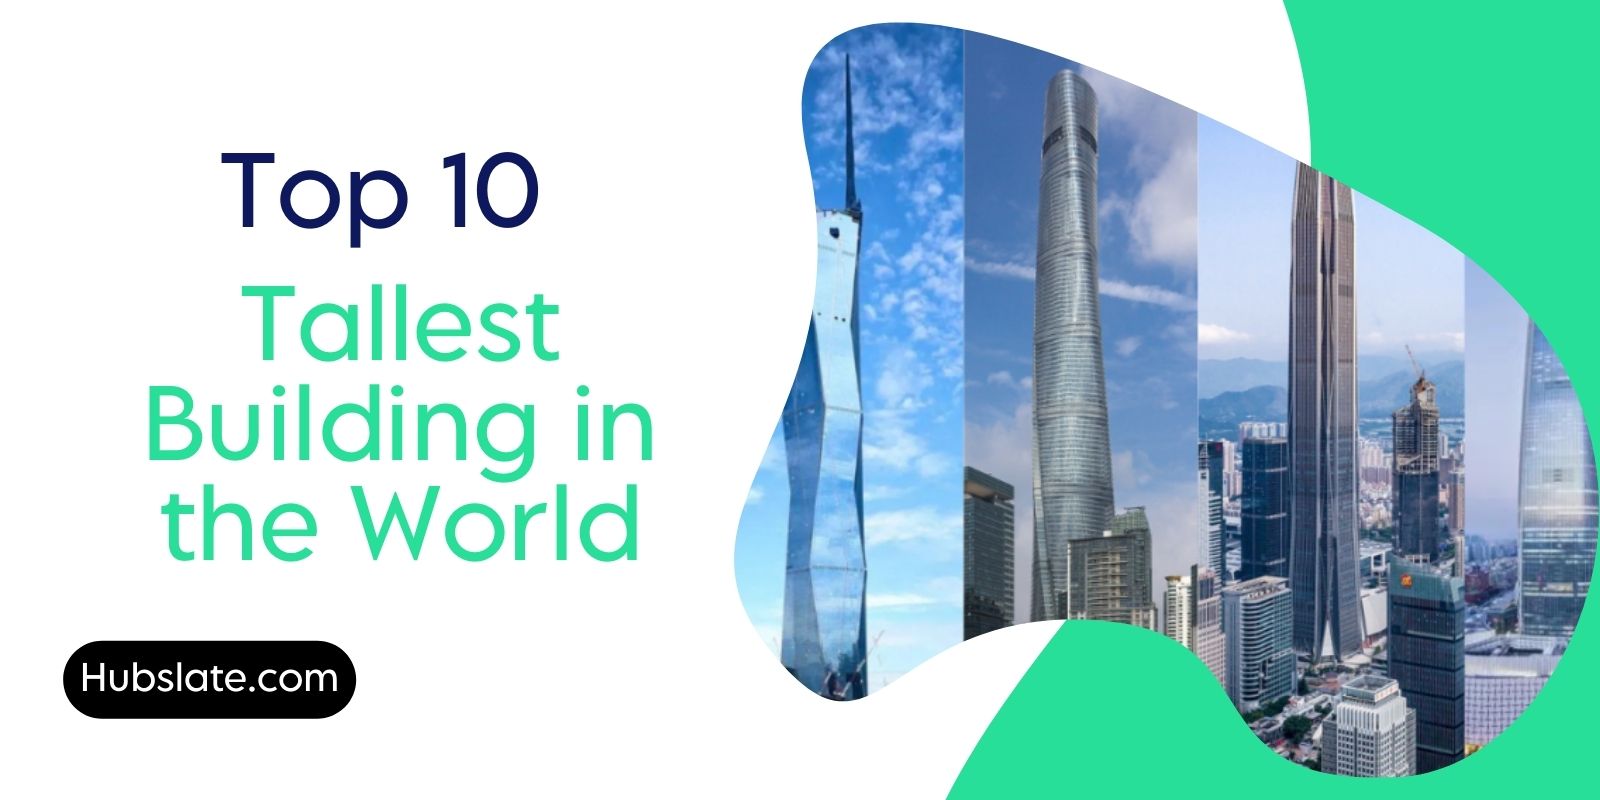 Top 10 Tallest Building in the World